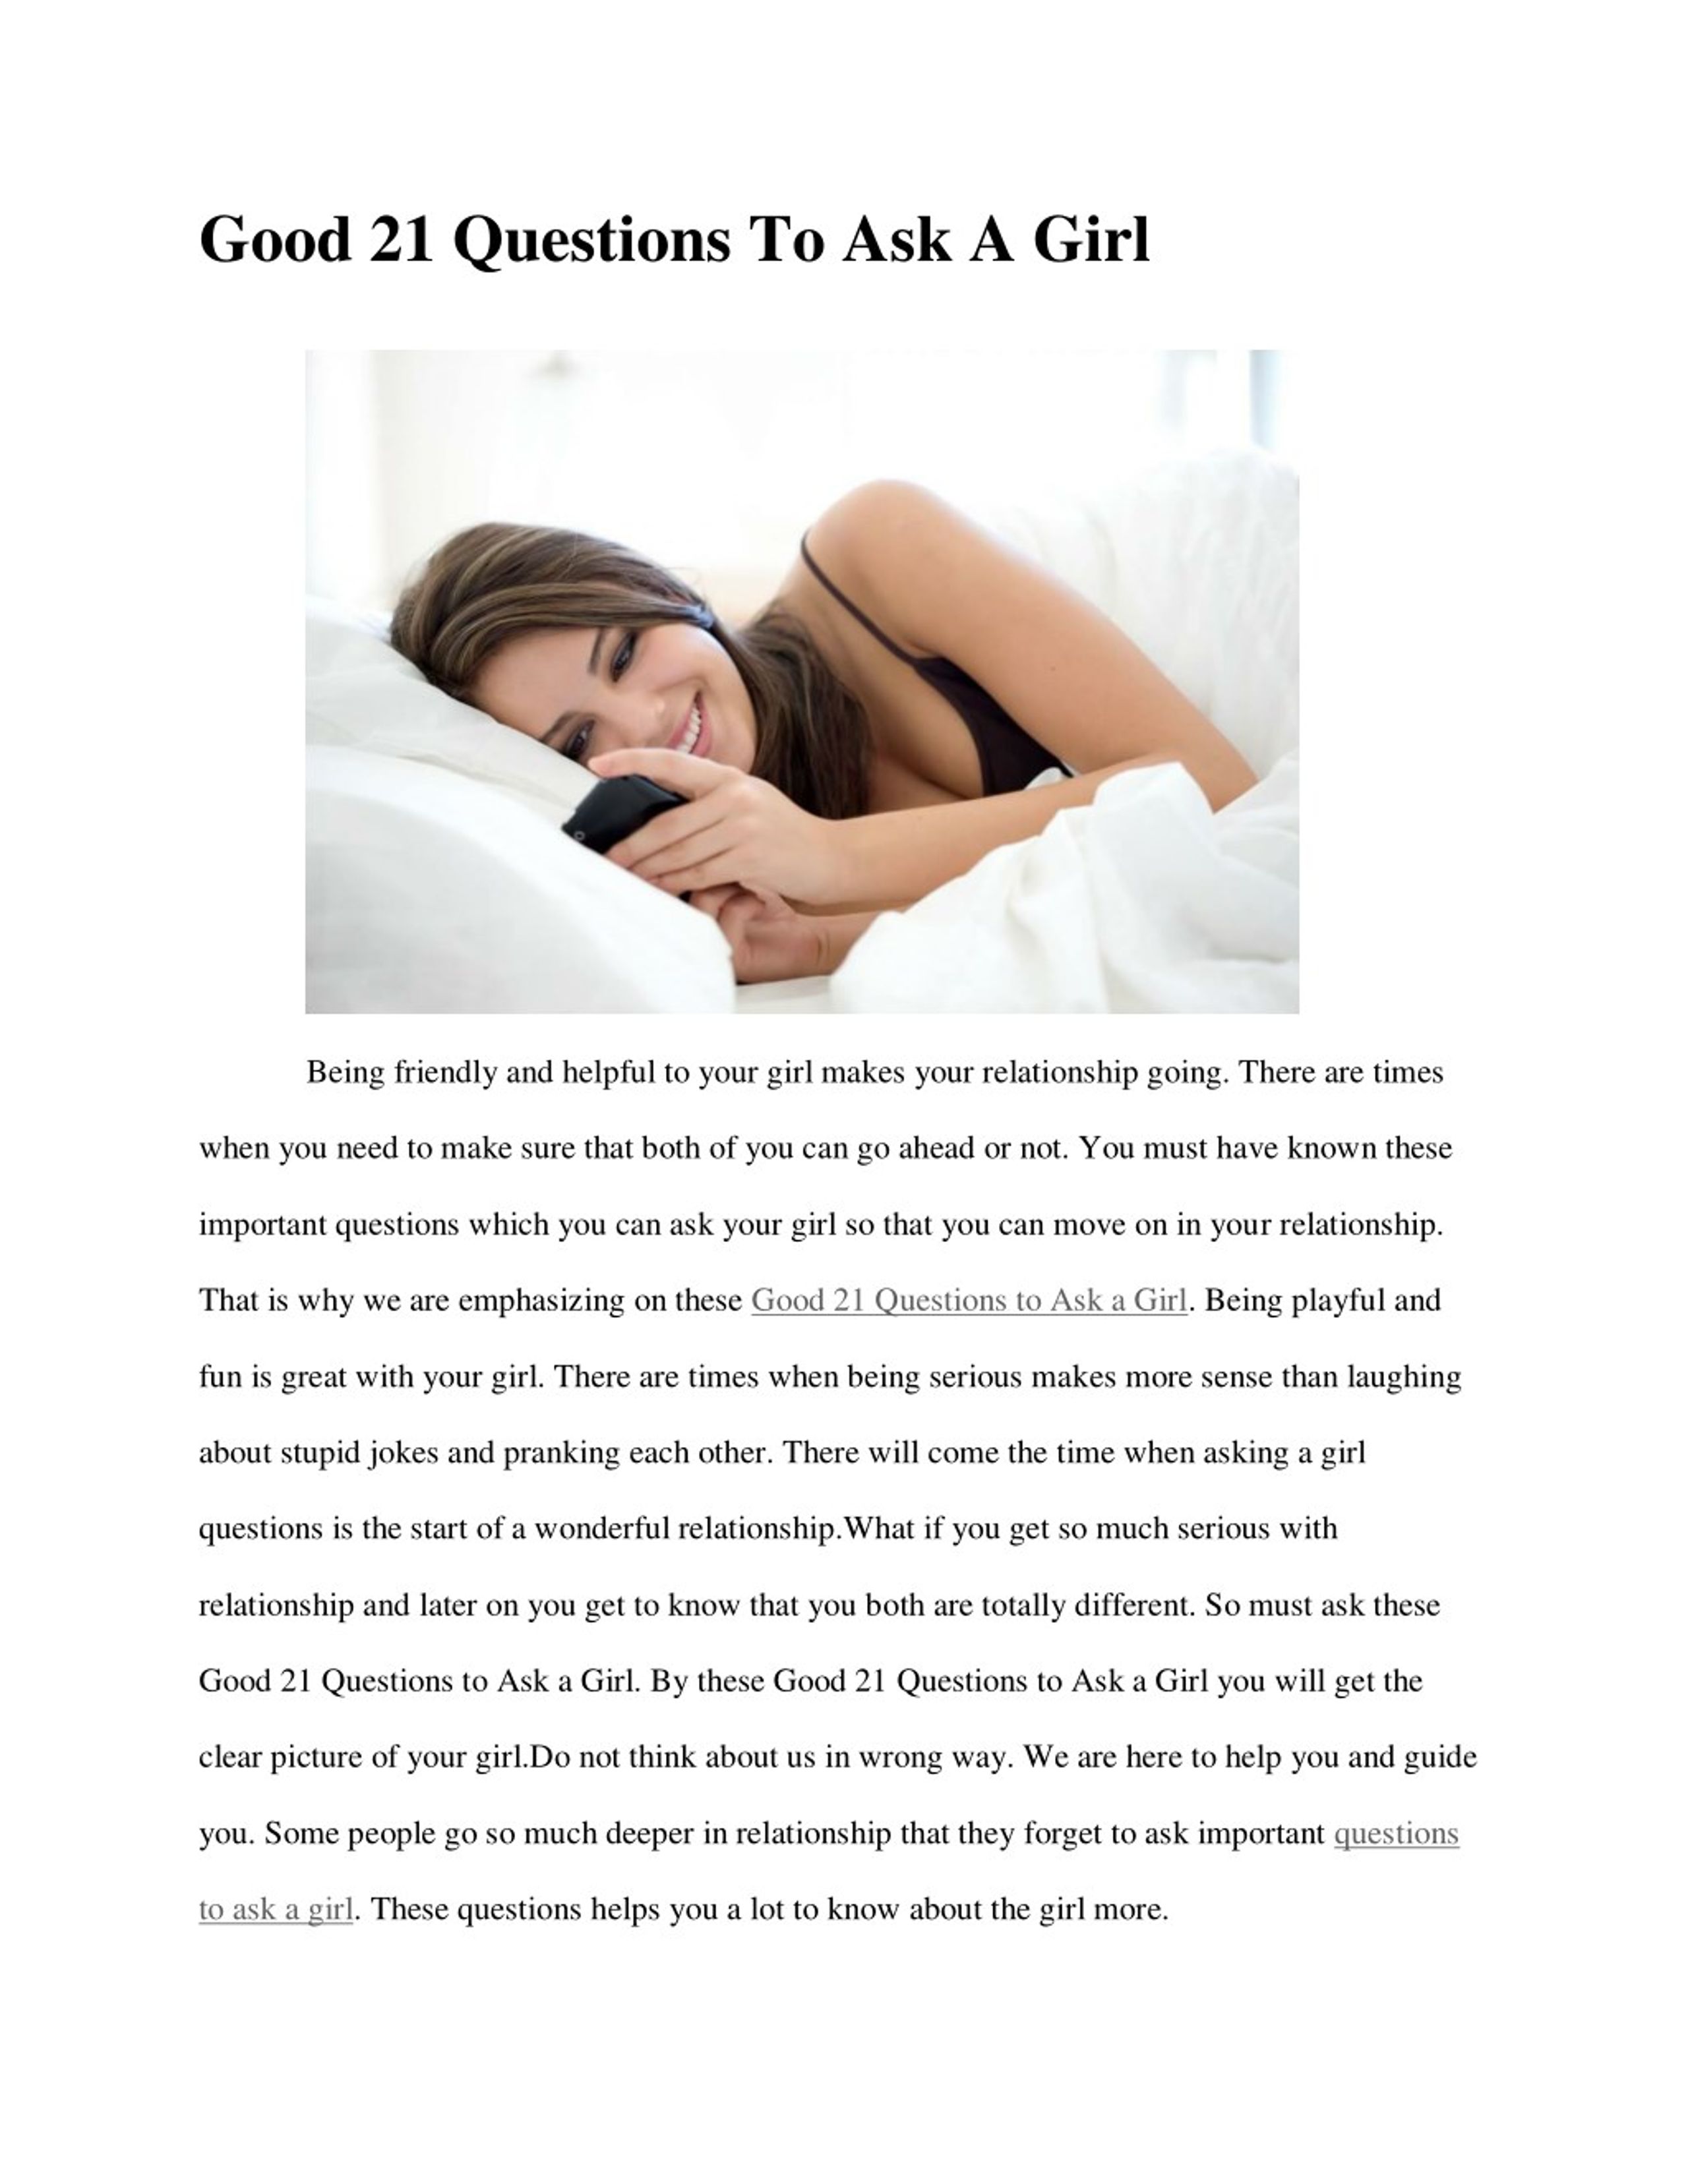 Weird questions to ask a girl can bring up all kinds of topics that might n...